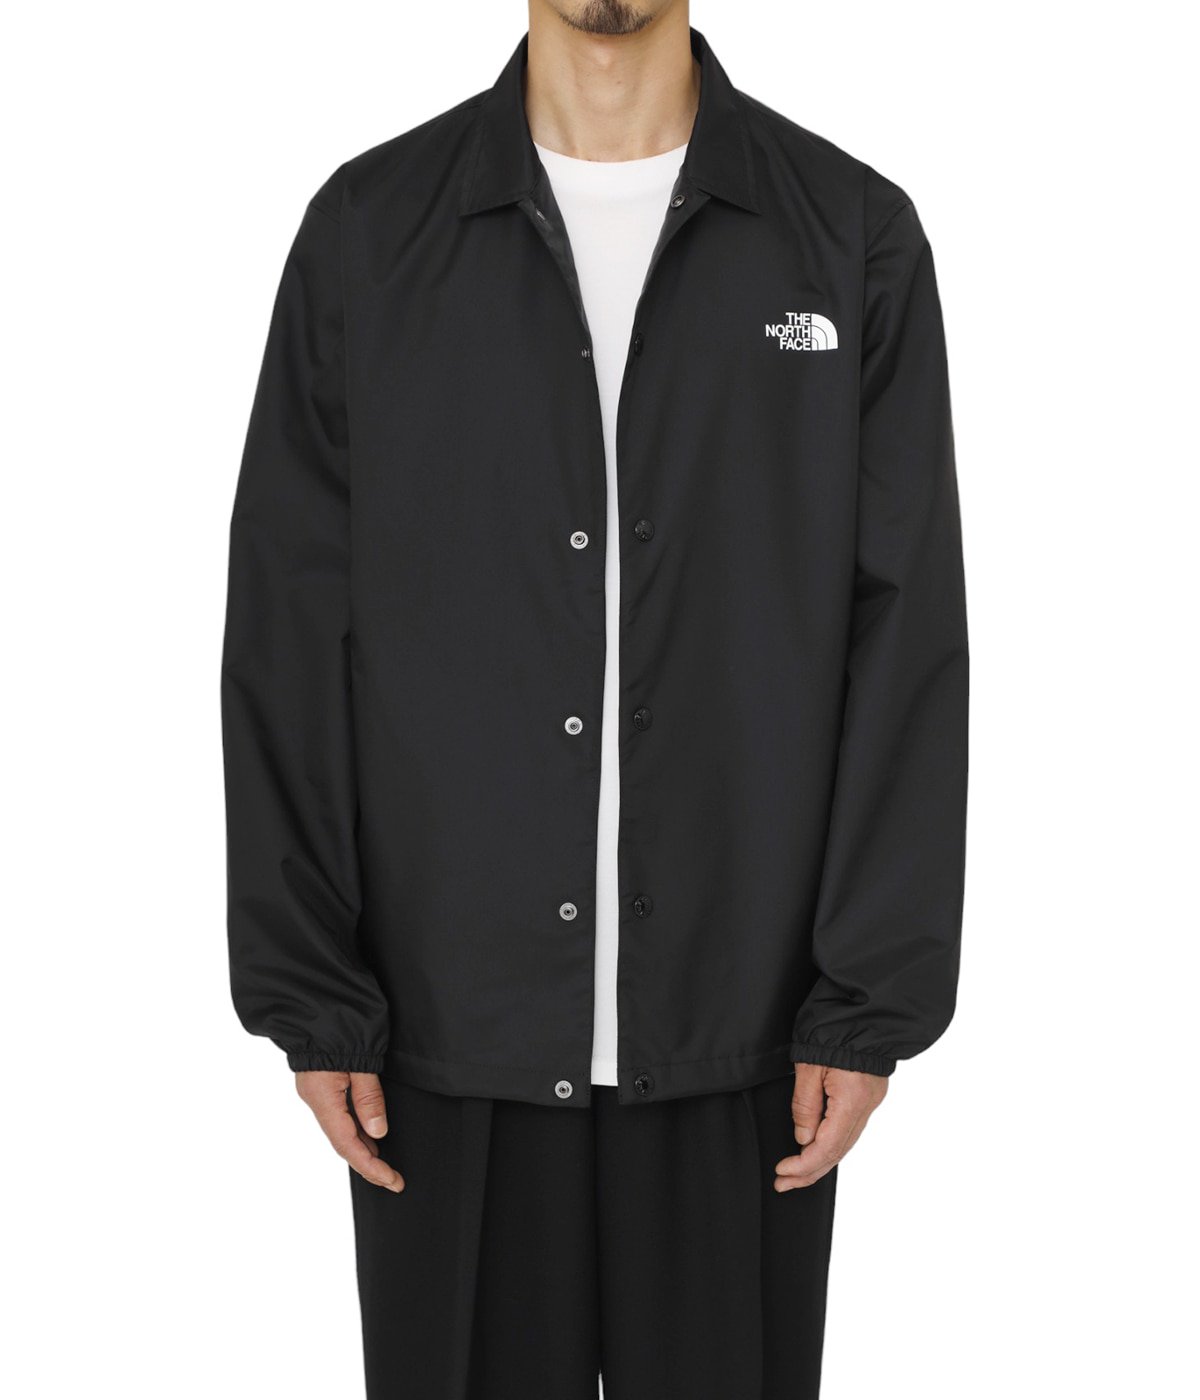 NEVER STOP ING The Coach Jacket | THE NORTH FACE(ザ ノースフェイス